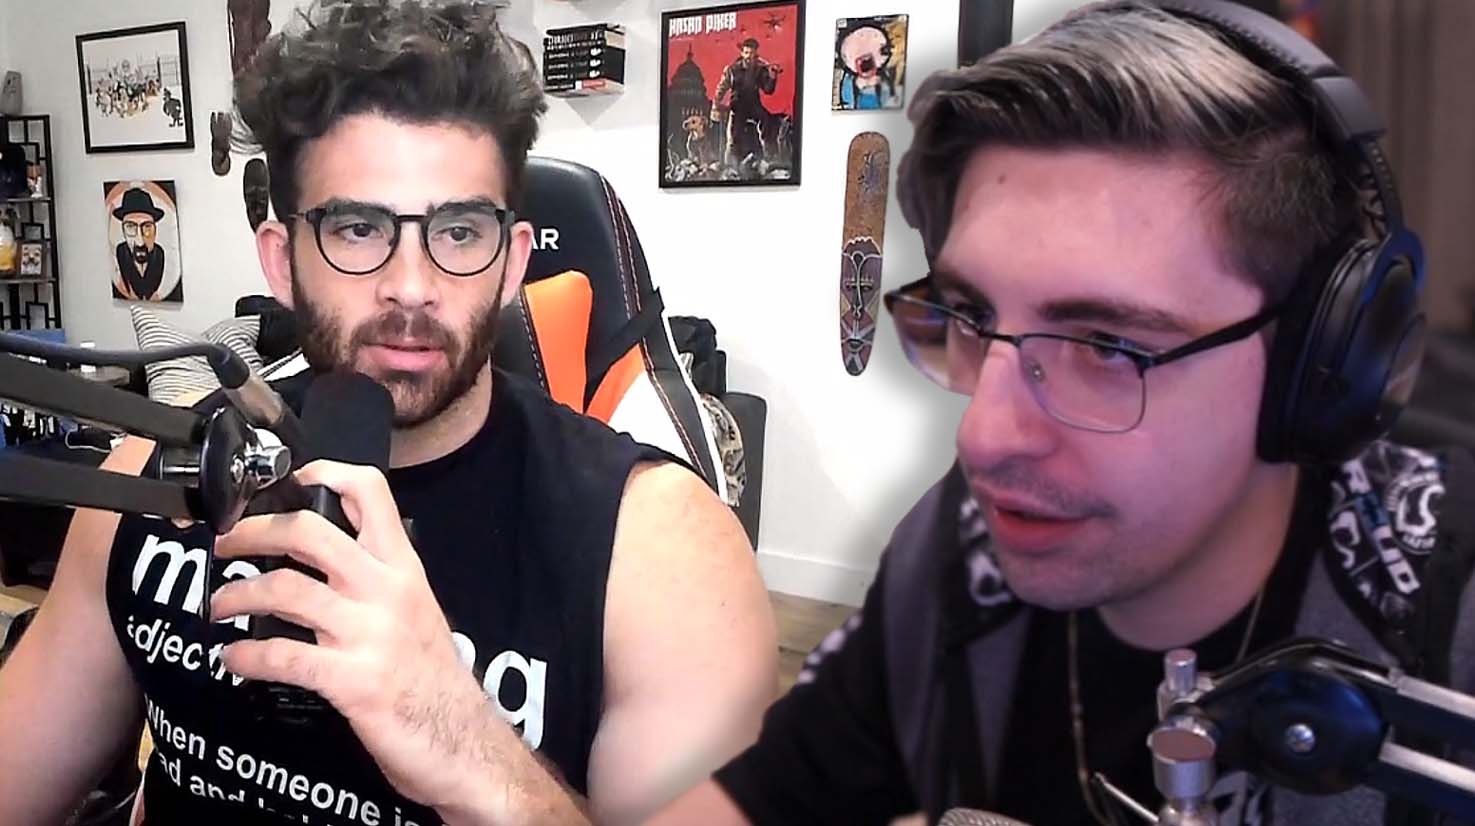 Shroud slams “ridiculous” Twitch outrage over Hasan buying new house